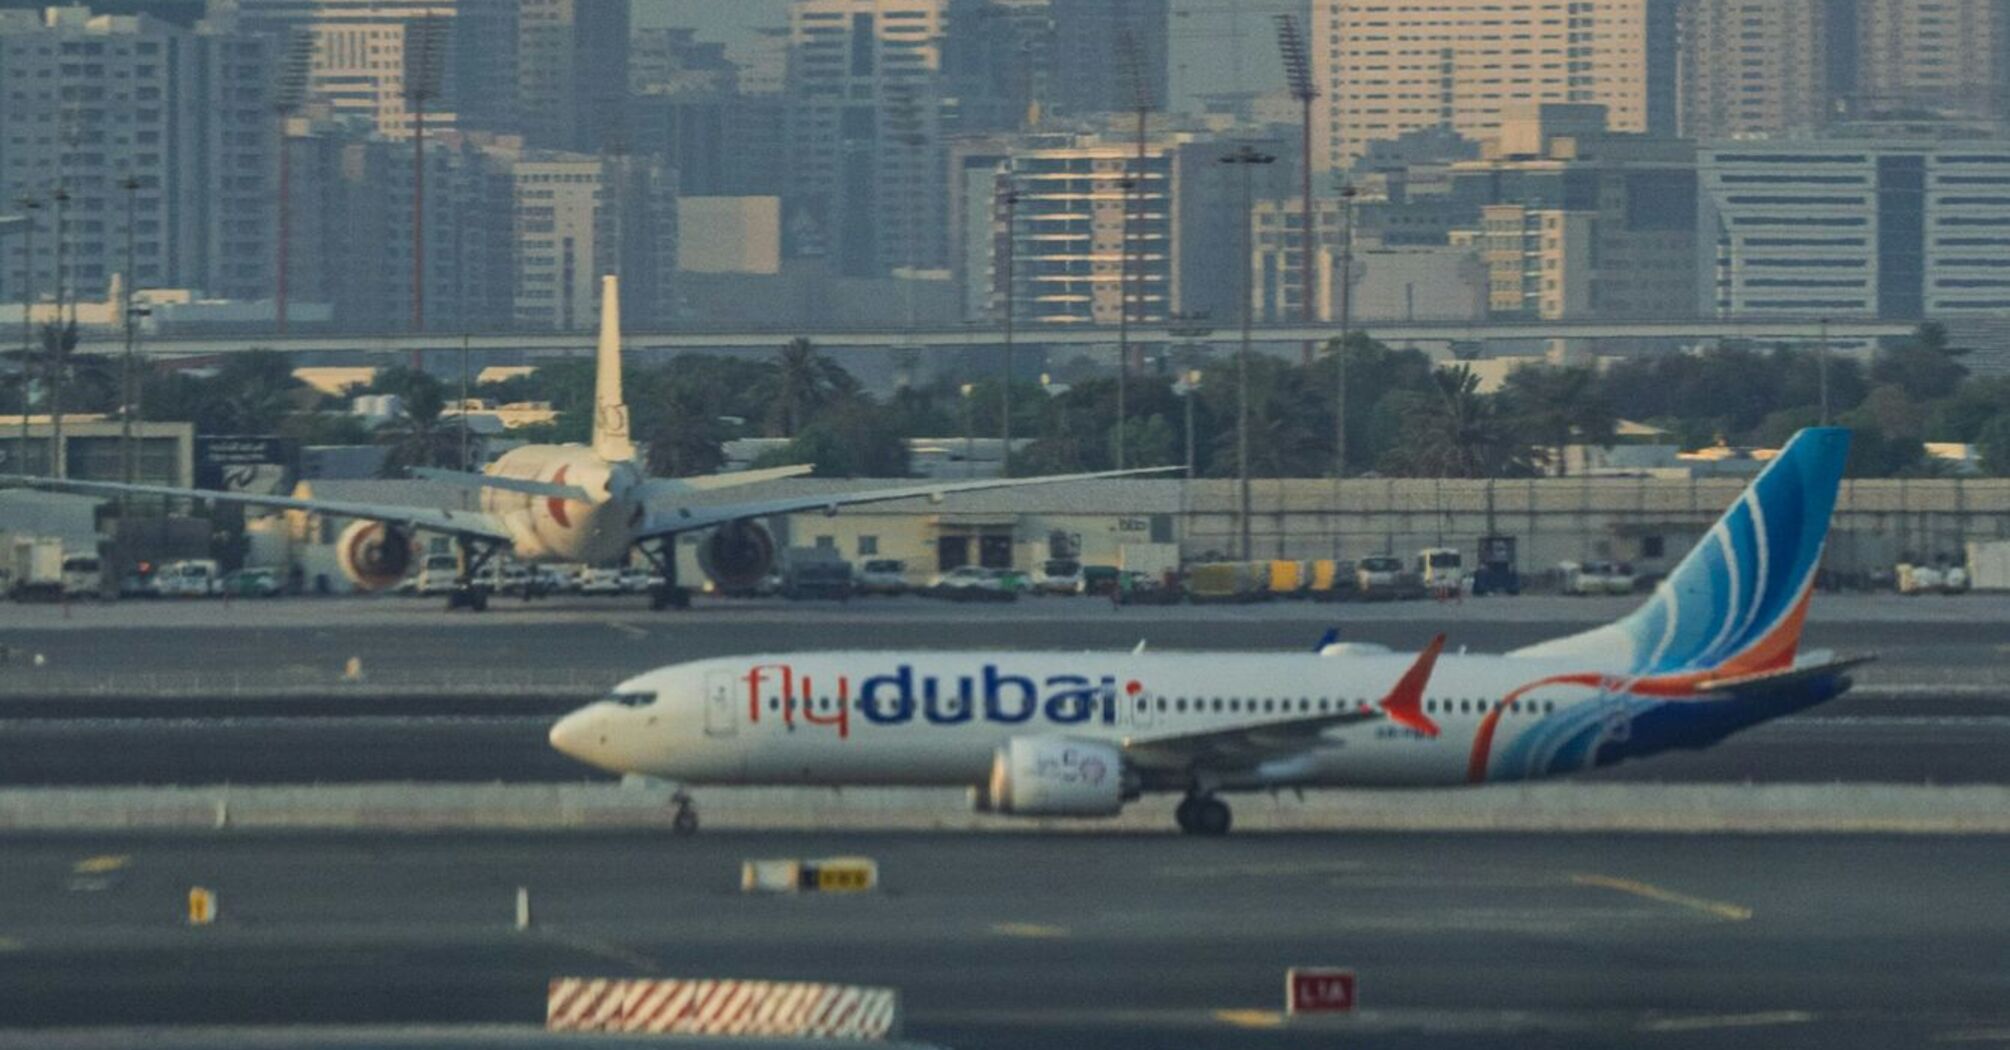 Flydubai airplane on runway with city skyline in background